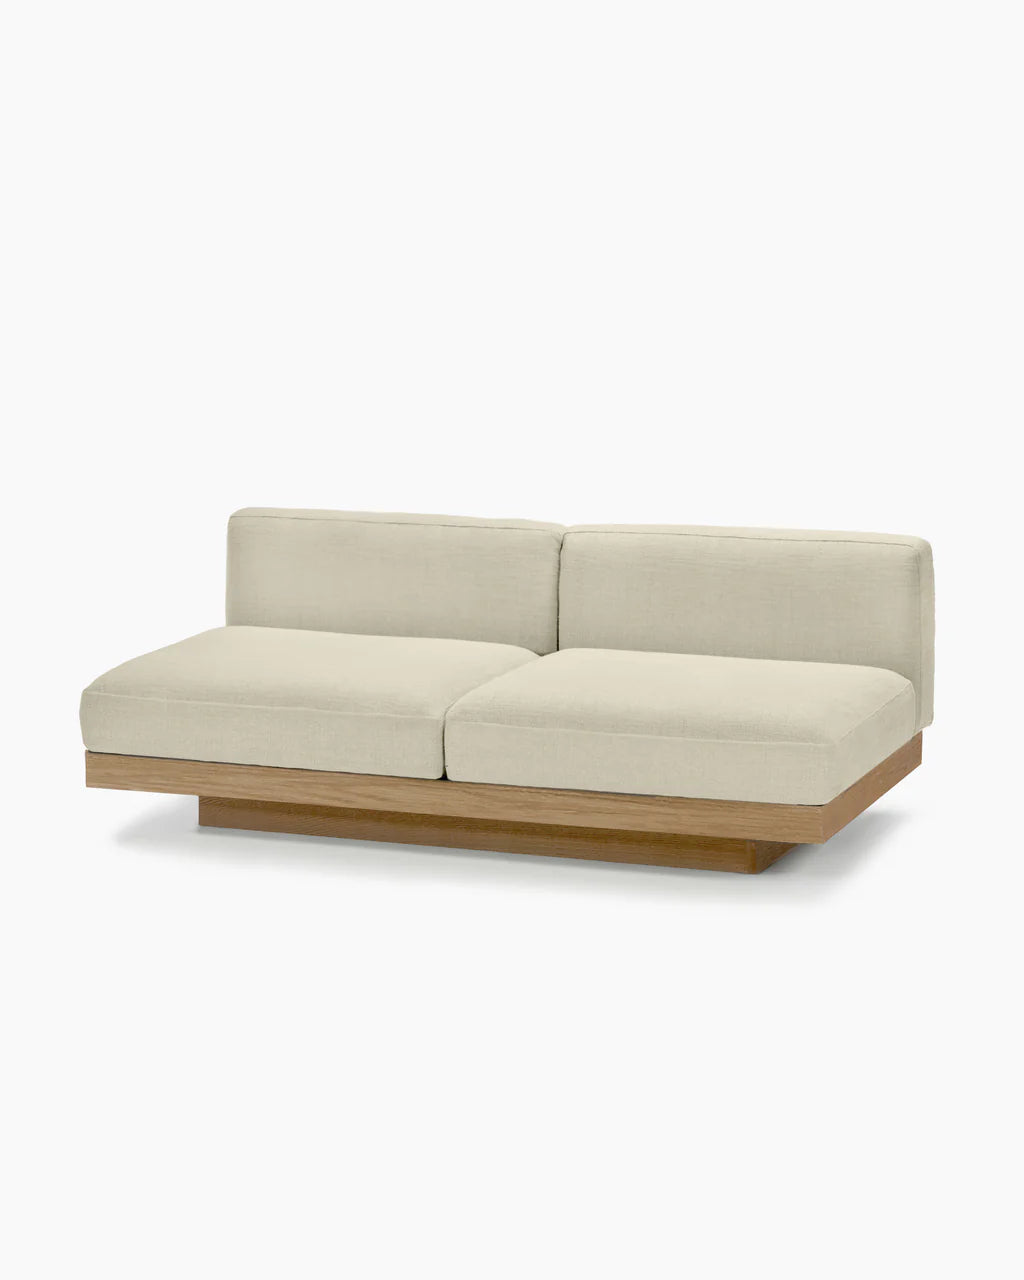 Two Seater Beige Outdoor Sofa